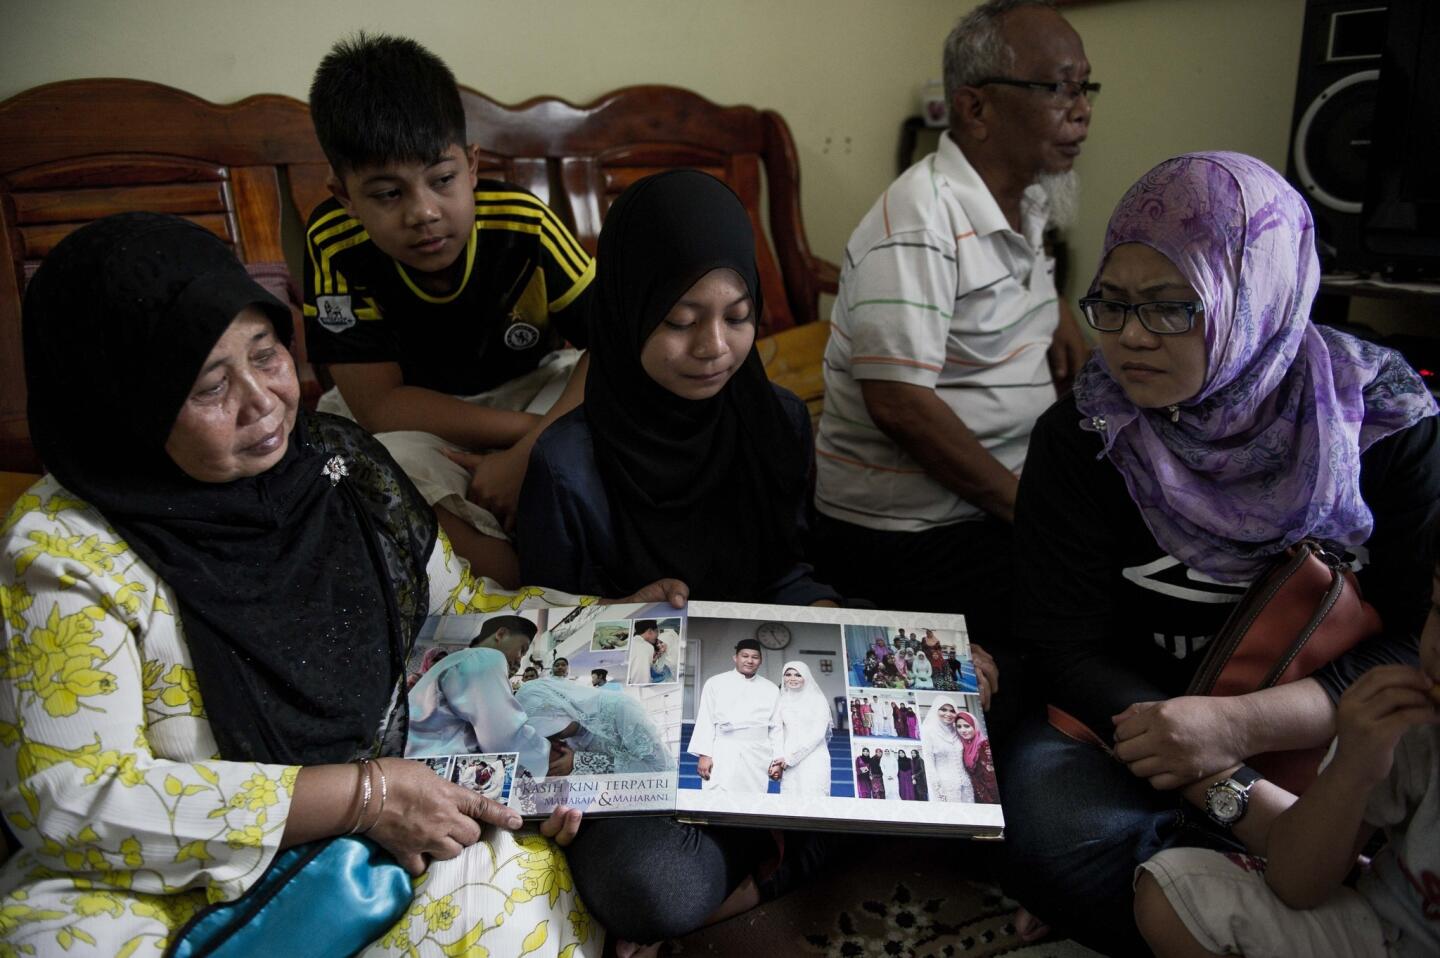 Family members look at a wedding album of Norliakmar Hamid and Razahan Zamani, passengers on a missing Malaysia Airlines Boeing 777-200 plane in Kuala Lumpur.